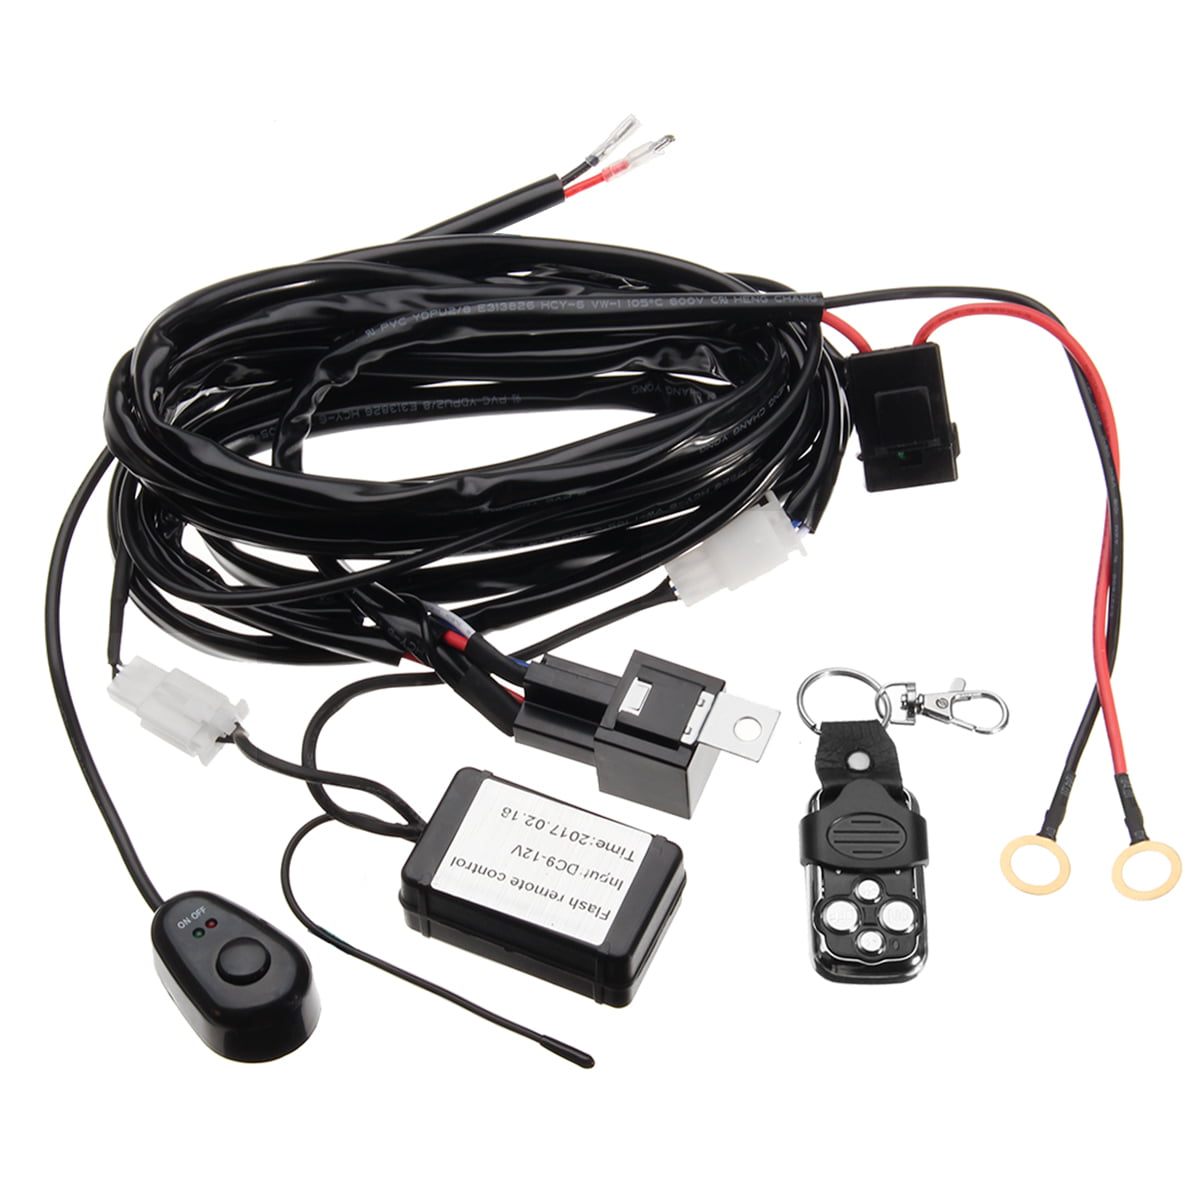 LED Light Bar Wiring Harness,200cm Light Bar LED Lamp Wiring 40A Relay Fuse On-off-strobe Remote Control Switch 